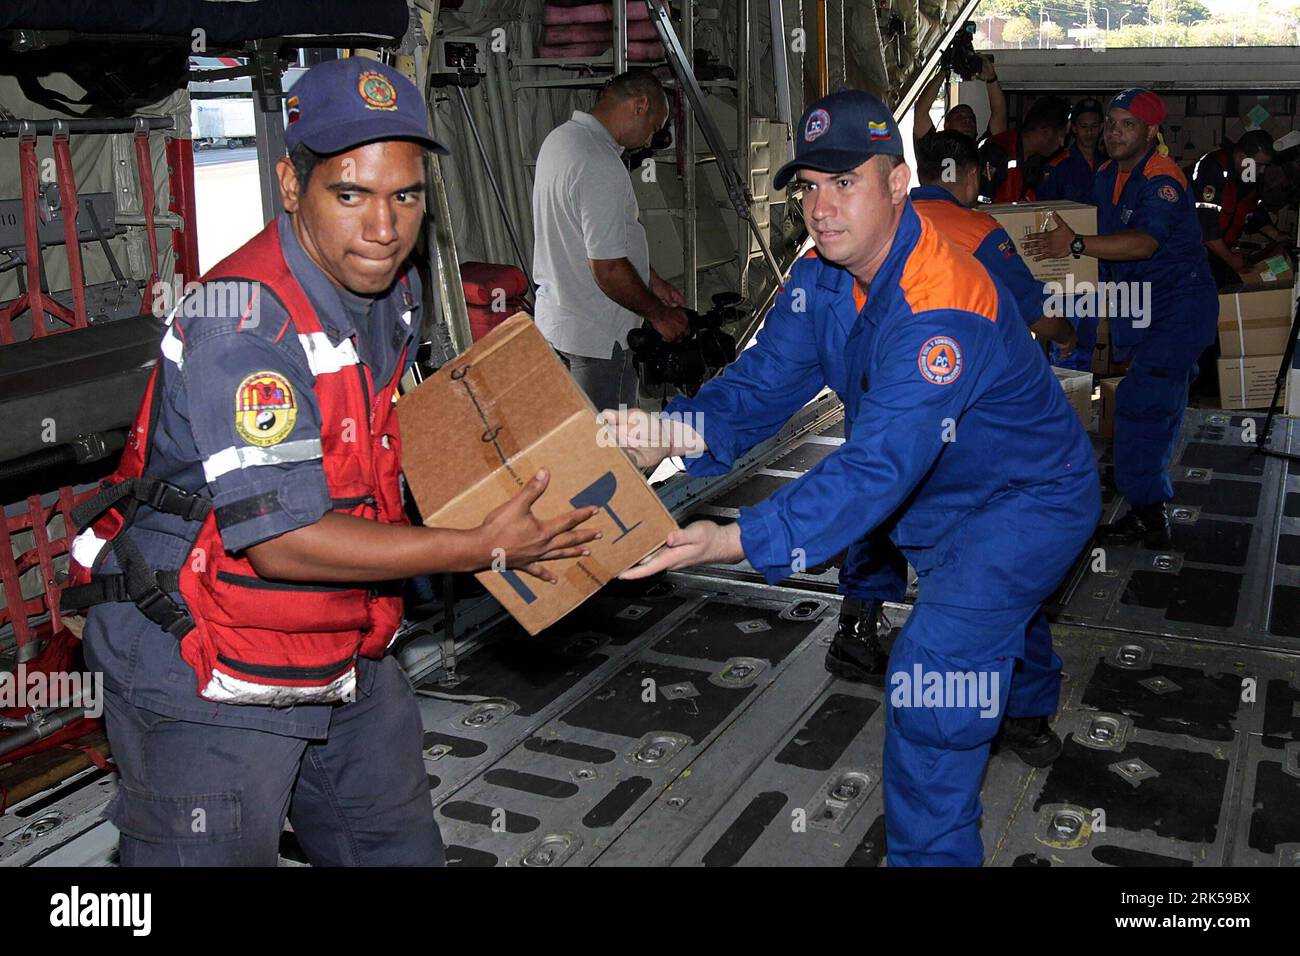 Bildnummer: 53724803  Datum: 13.01.2010  Copyright: imago/Xinhua (100113) -- MAIQUETIA, Jan. 13, 2010 (Xinhua) -- Venezuelan rescuers load medical equipment onto an army plane heading to Port-au-Prince, capital of Haiti, at the Simon Bolivar international airport in Maiquetia, Venezuela, on Jan. 13, 2010, following a huge quake measuring 7.3 that rocked the Caribbean nation, toppling buildings and leaving thousands of missing and feared dead. (Xinhua/ABN) (gxr) (2)VENEZUELA-MAIQUETIA-RESCUERS-HAITI PUBLICATIONxNOTxINxCHN Erdbeben Hilfe Hilfslieferung Hilfsgüter premiumd kbdig xsk 2010 quer  o0 Stock Photo